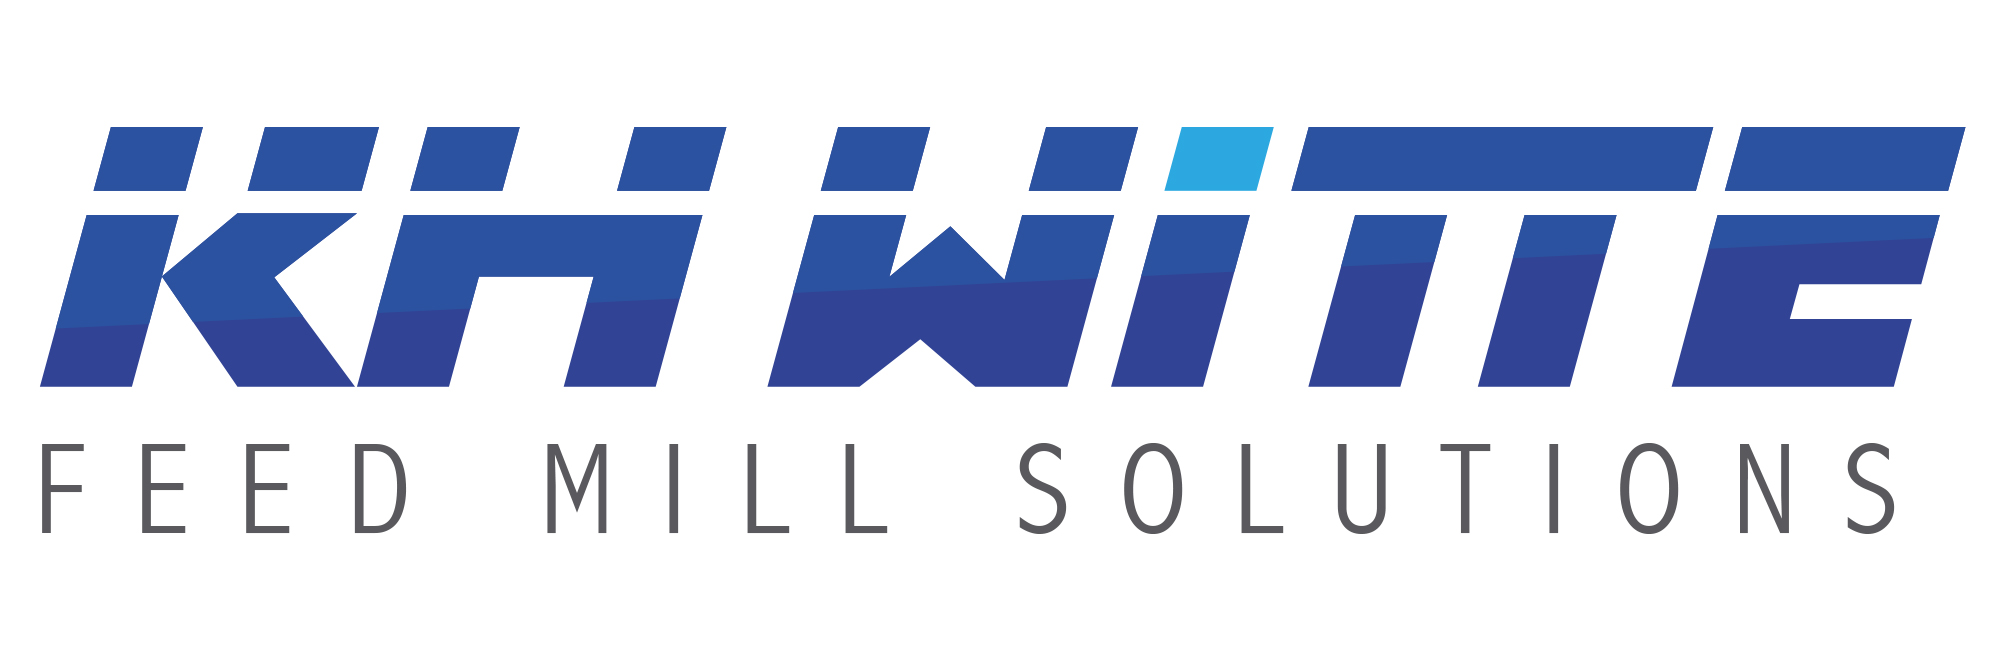 KH WITTE FEED MILL SOLUTIONS GmbH